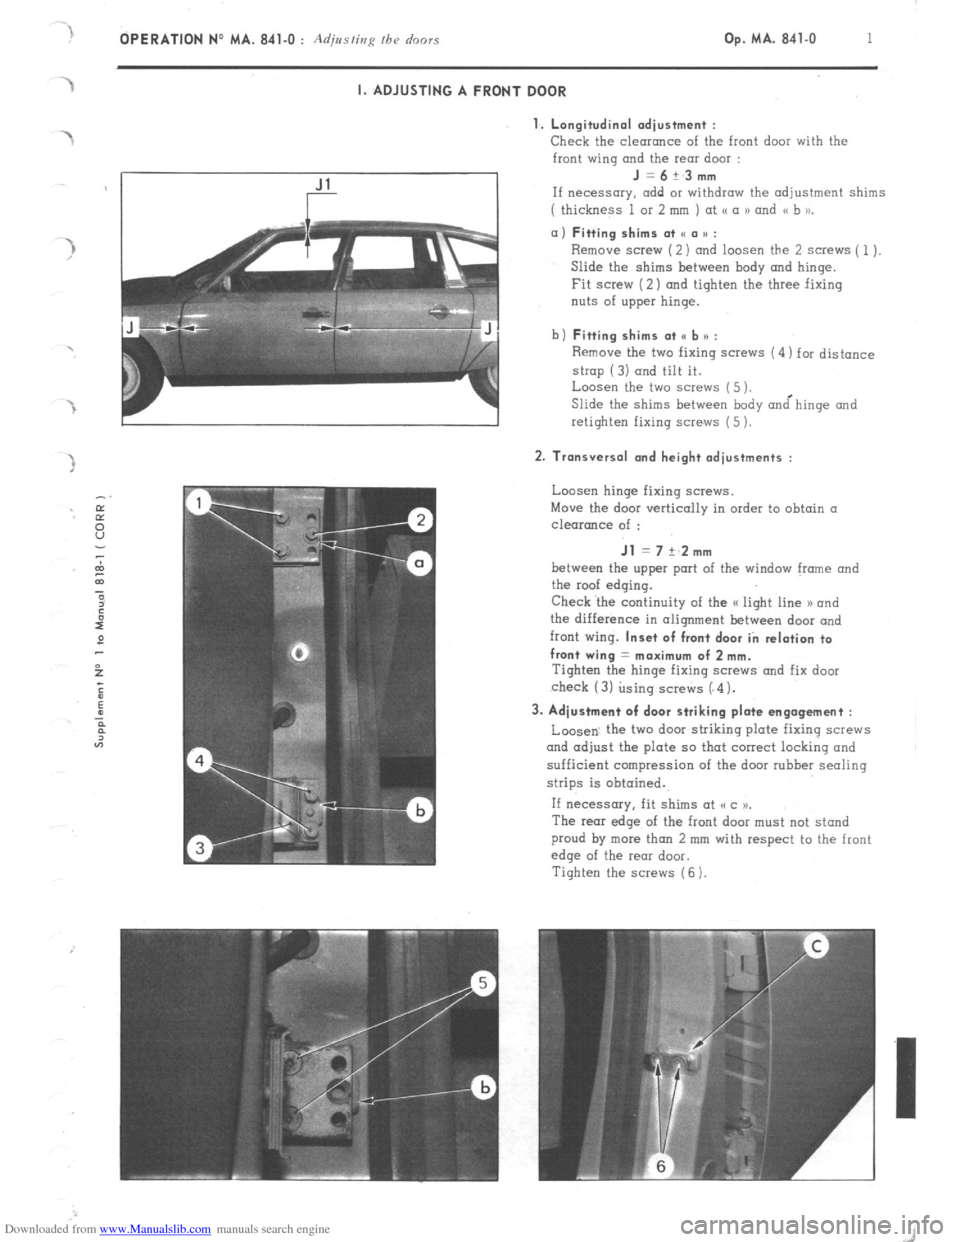 Citroen CX 1981 1.G Service Manual Downloaded from www.Manualslib.com manuals search engine OPERATION No MA. 841-O : Adjusting fh~ doors Op. MA. 841-O 1 I. ADJUSTING A FRONT DOOR 
1. Longitudinal adiustment : 
Check 
the clearance of t